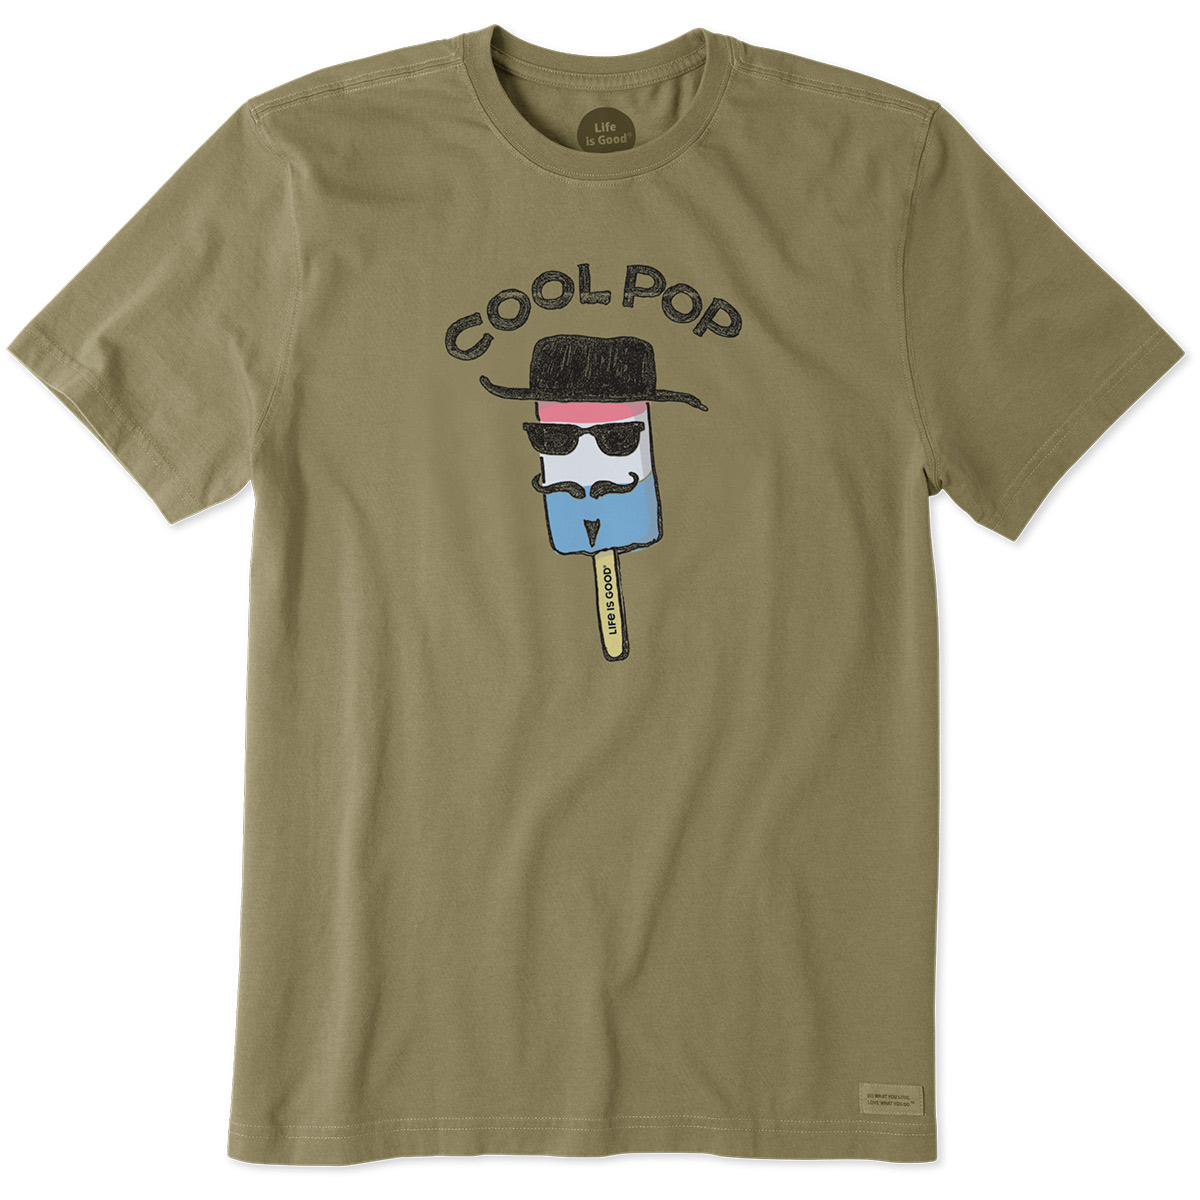 Life Is Good Men's Cool Pop Crusher Short-Sleeve Graphic Tee - Green, L